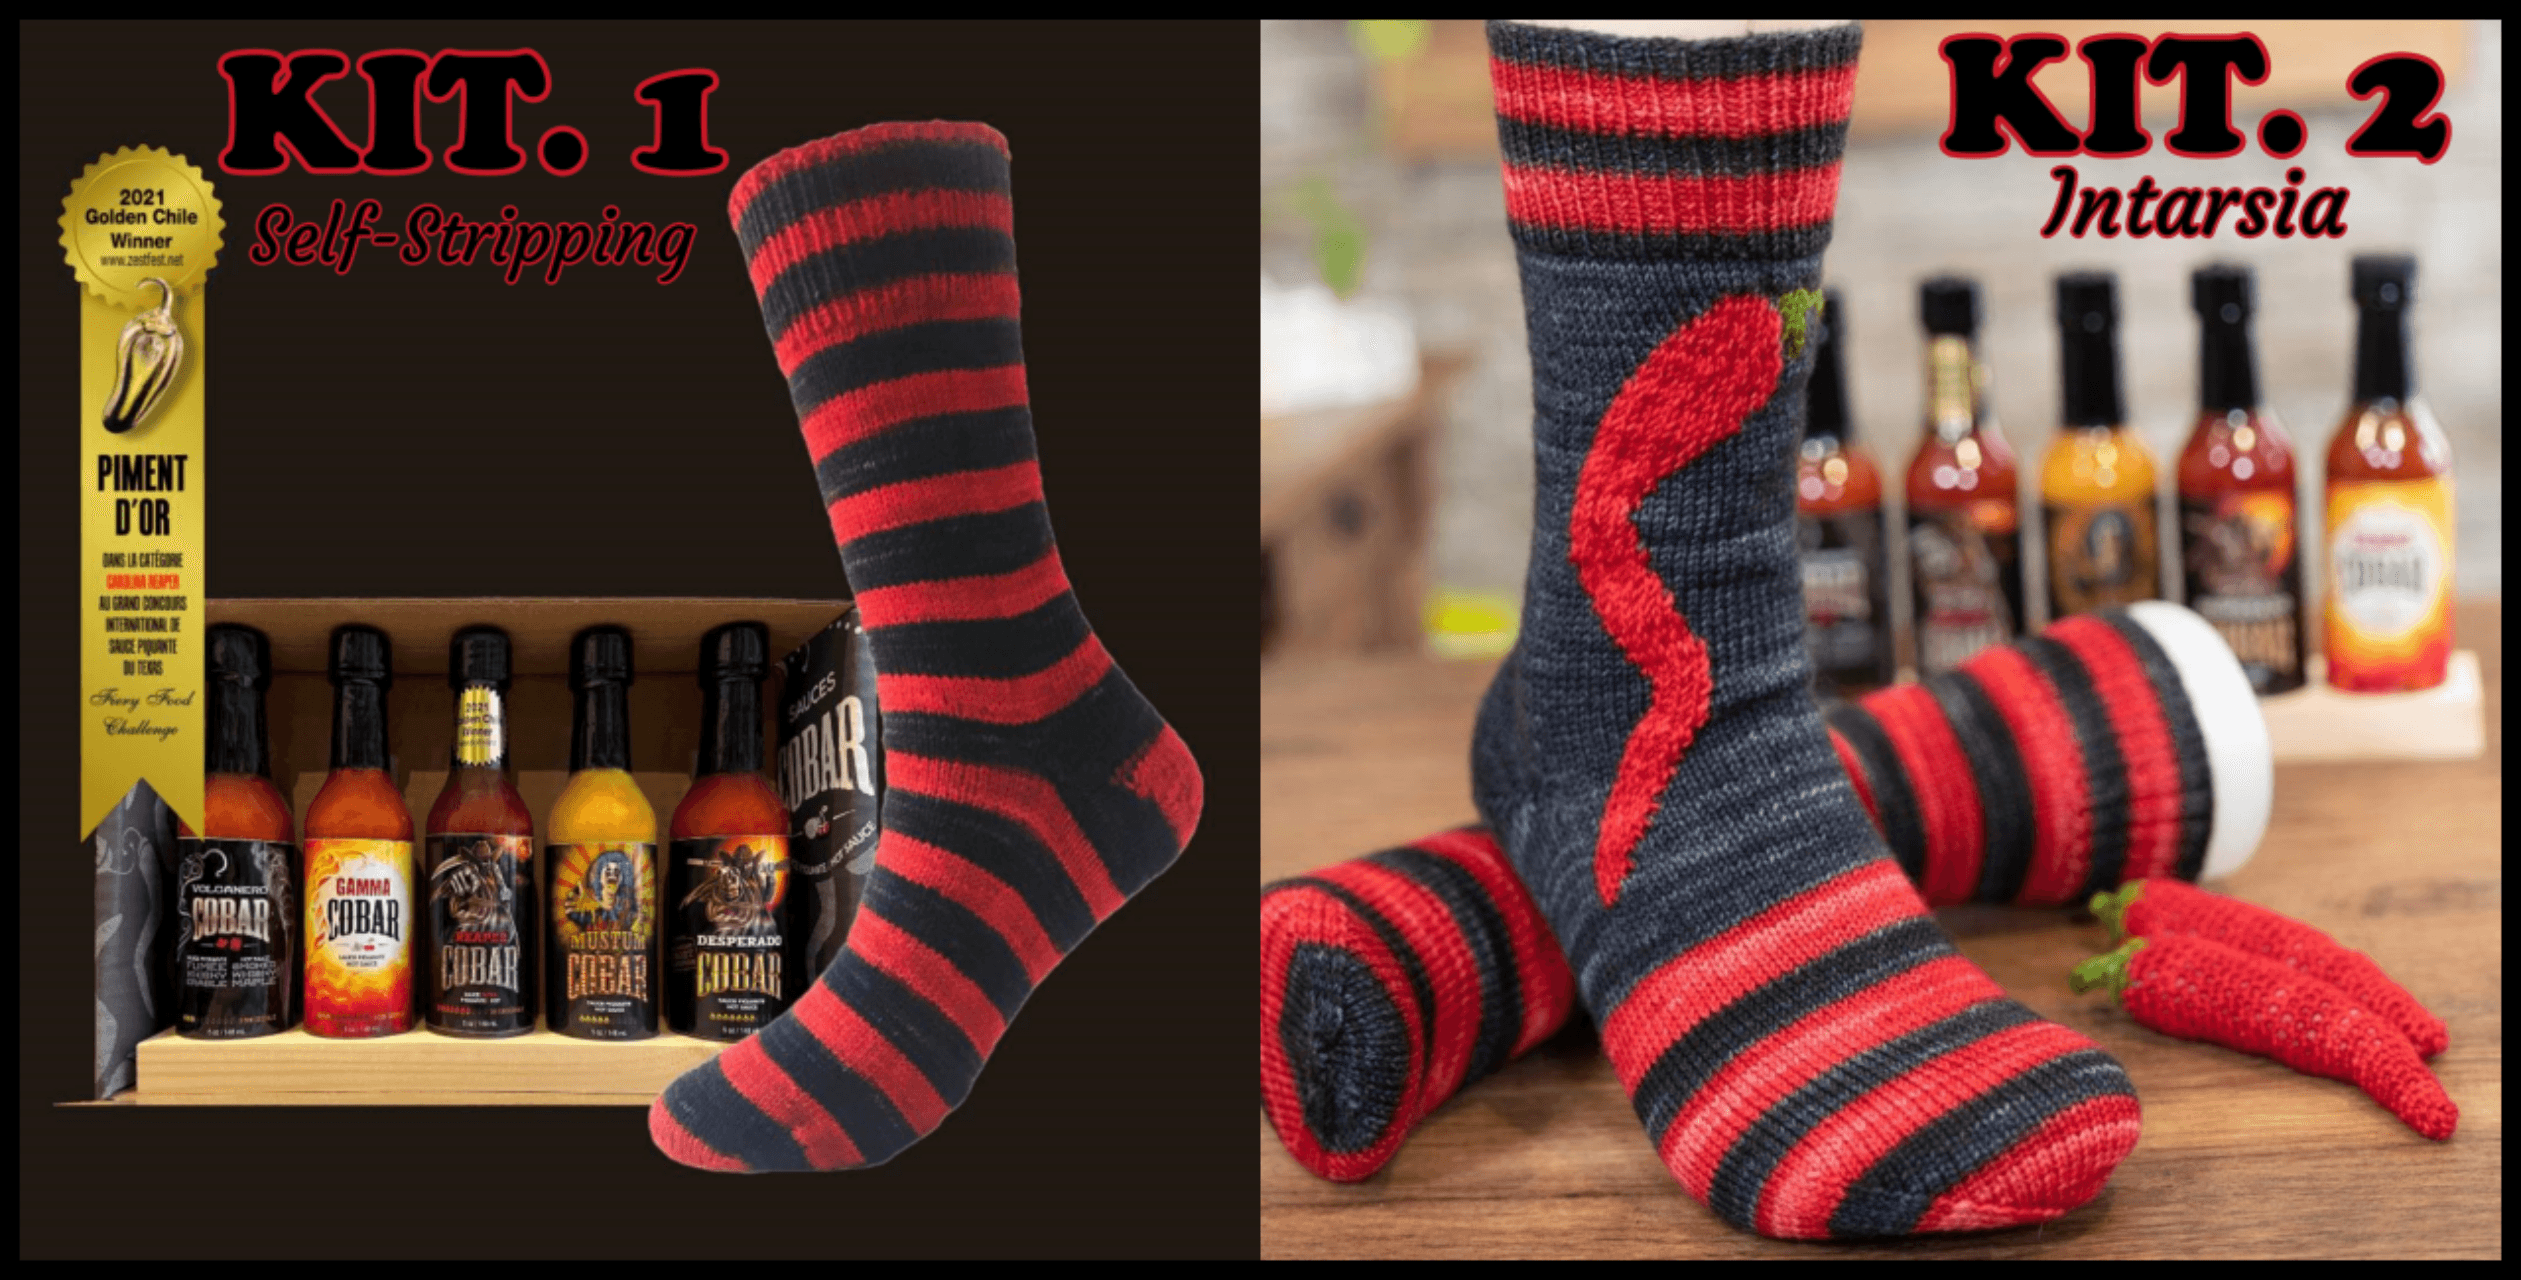 Knitting kit COBAR SOCKS (2 versions offered) - with HOT SAUCE GIFT SET